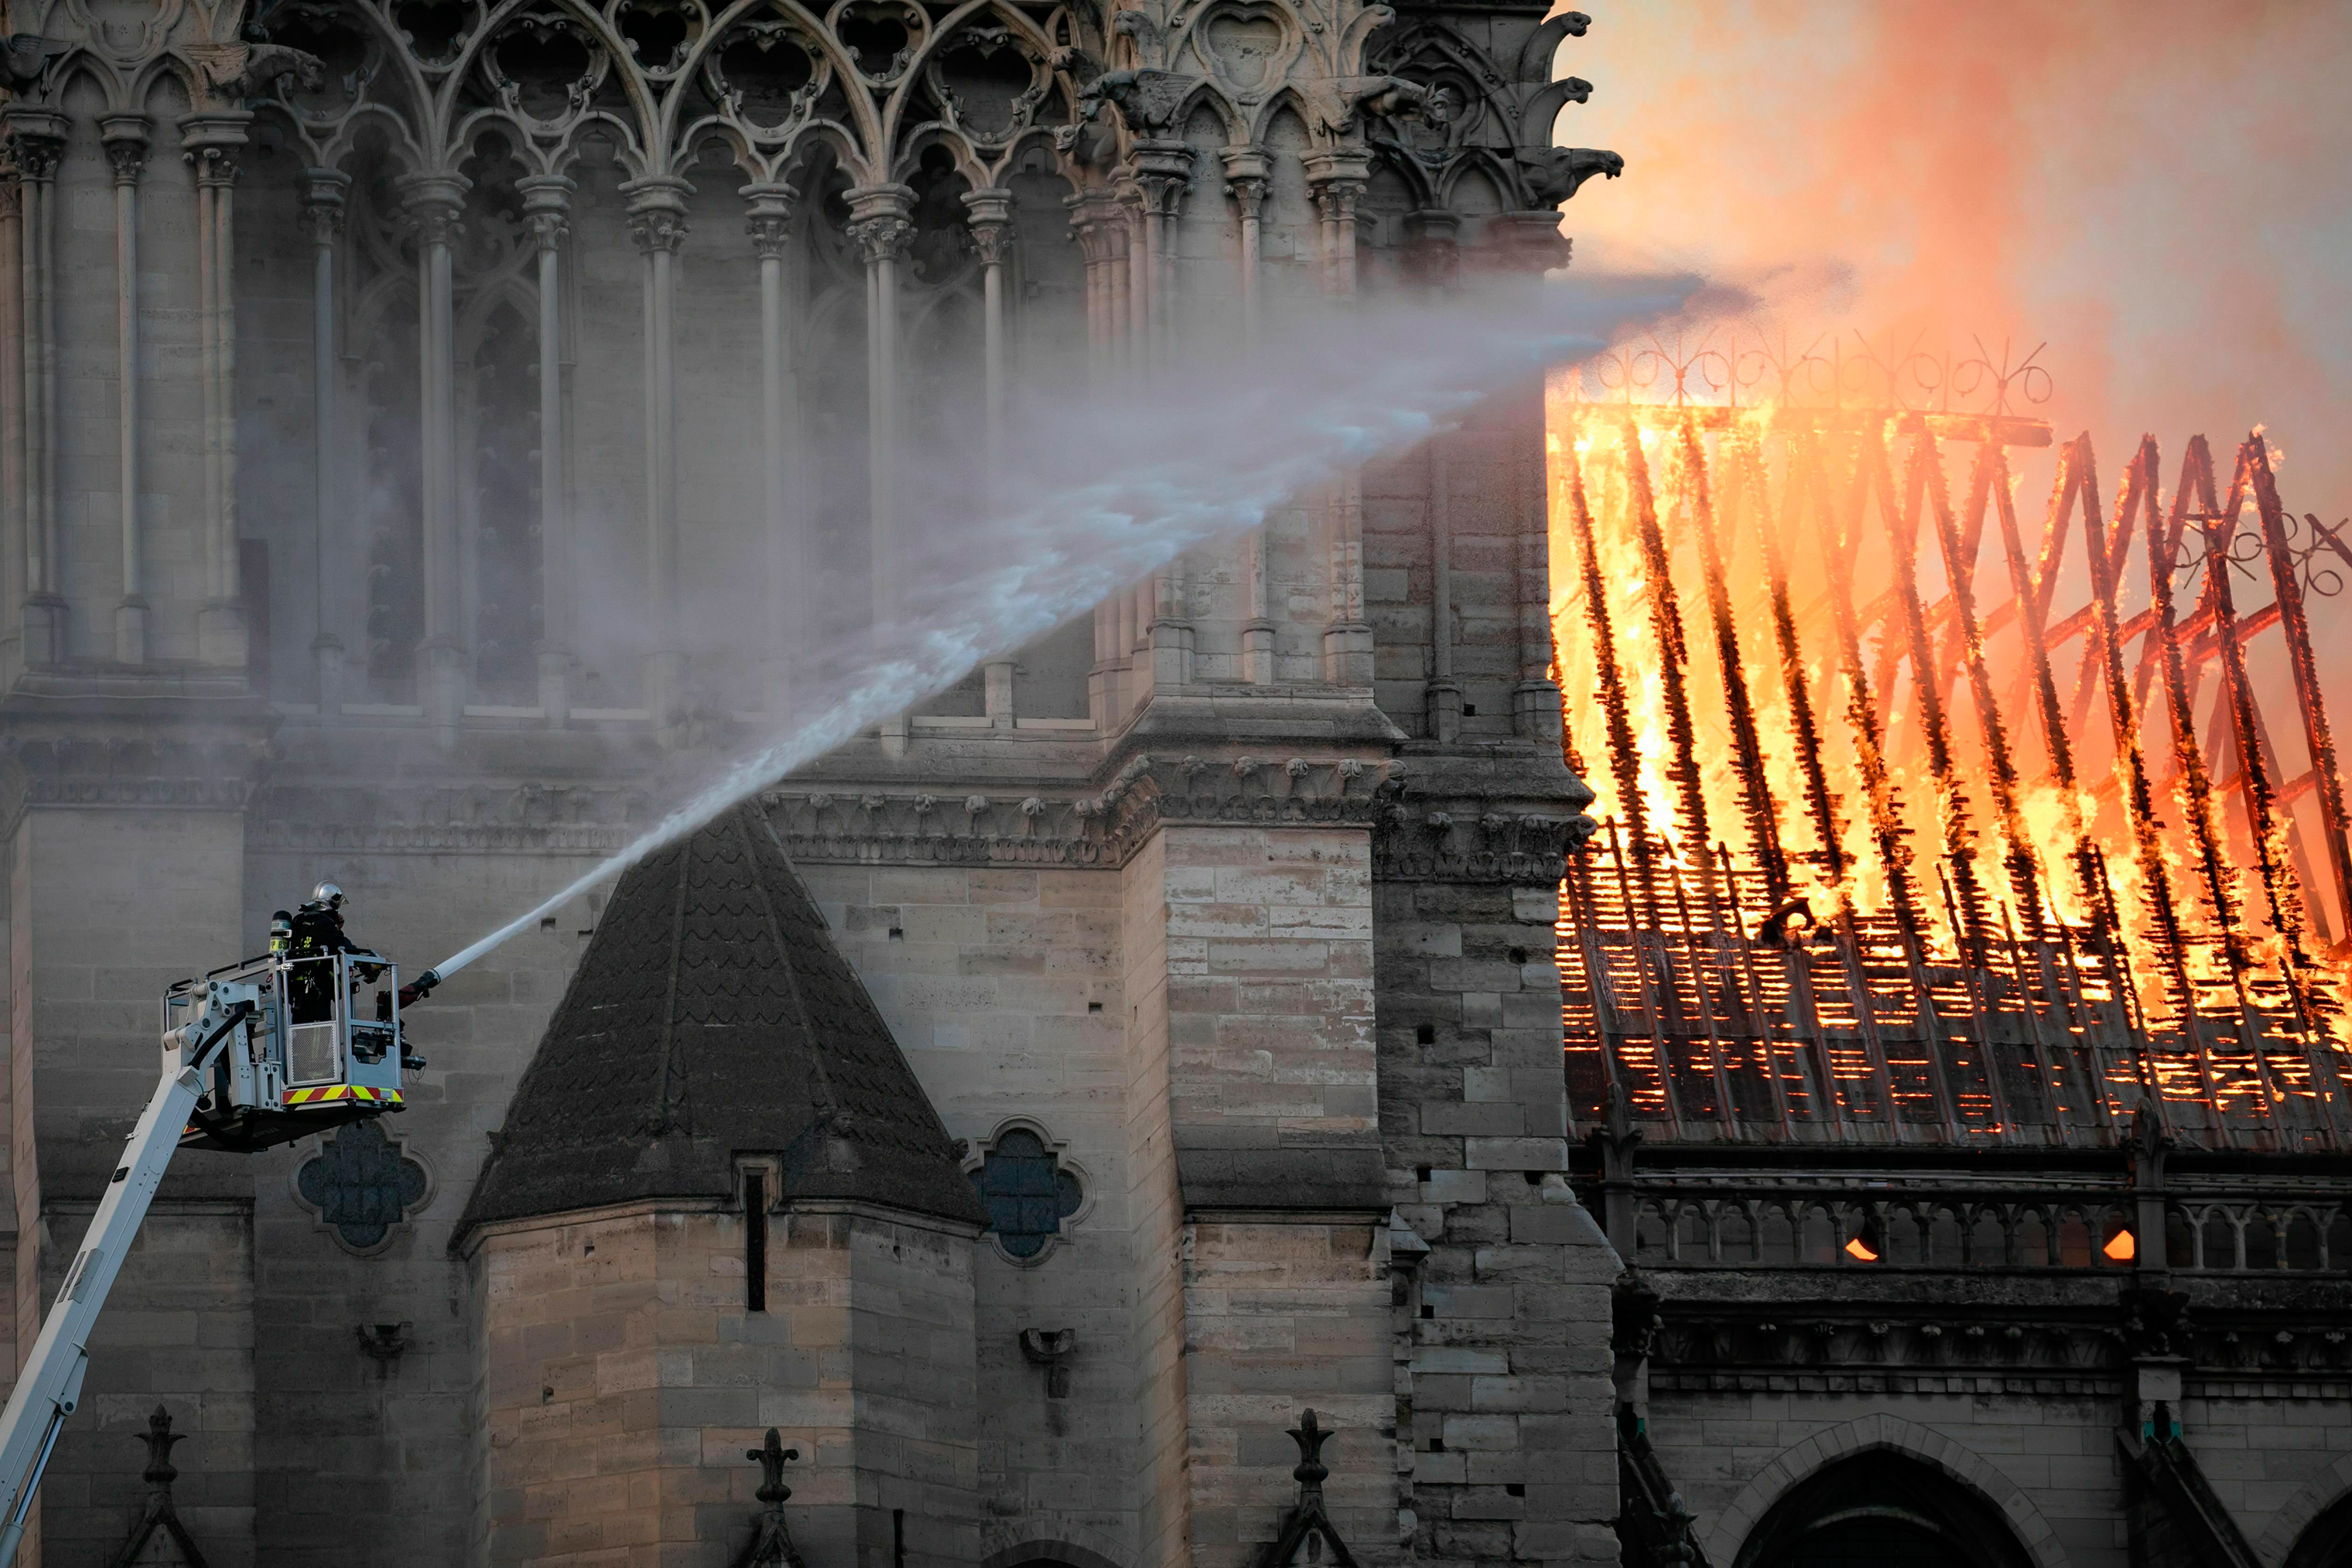 The Notre-Dame Cathedral in Paris on fire, April 15, 2019. (Romuald Meigneux—SIPA/AP)